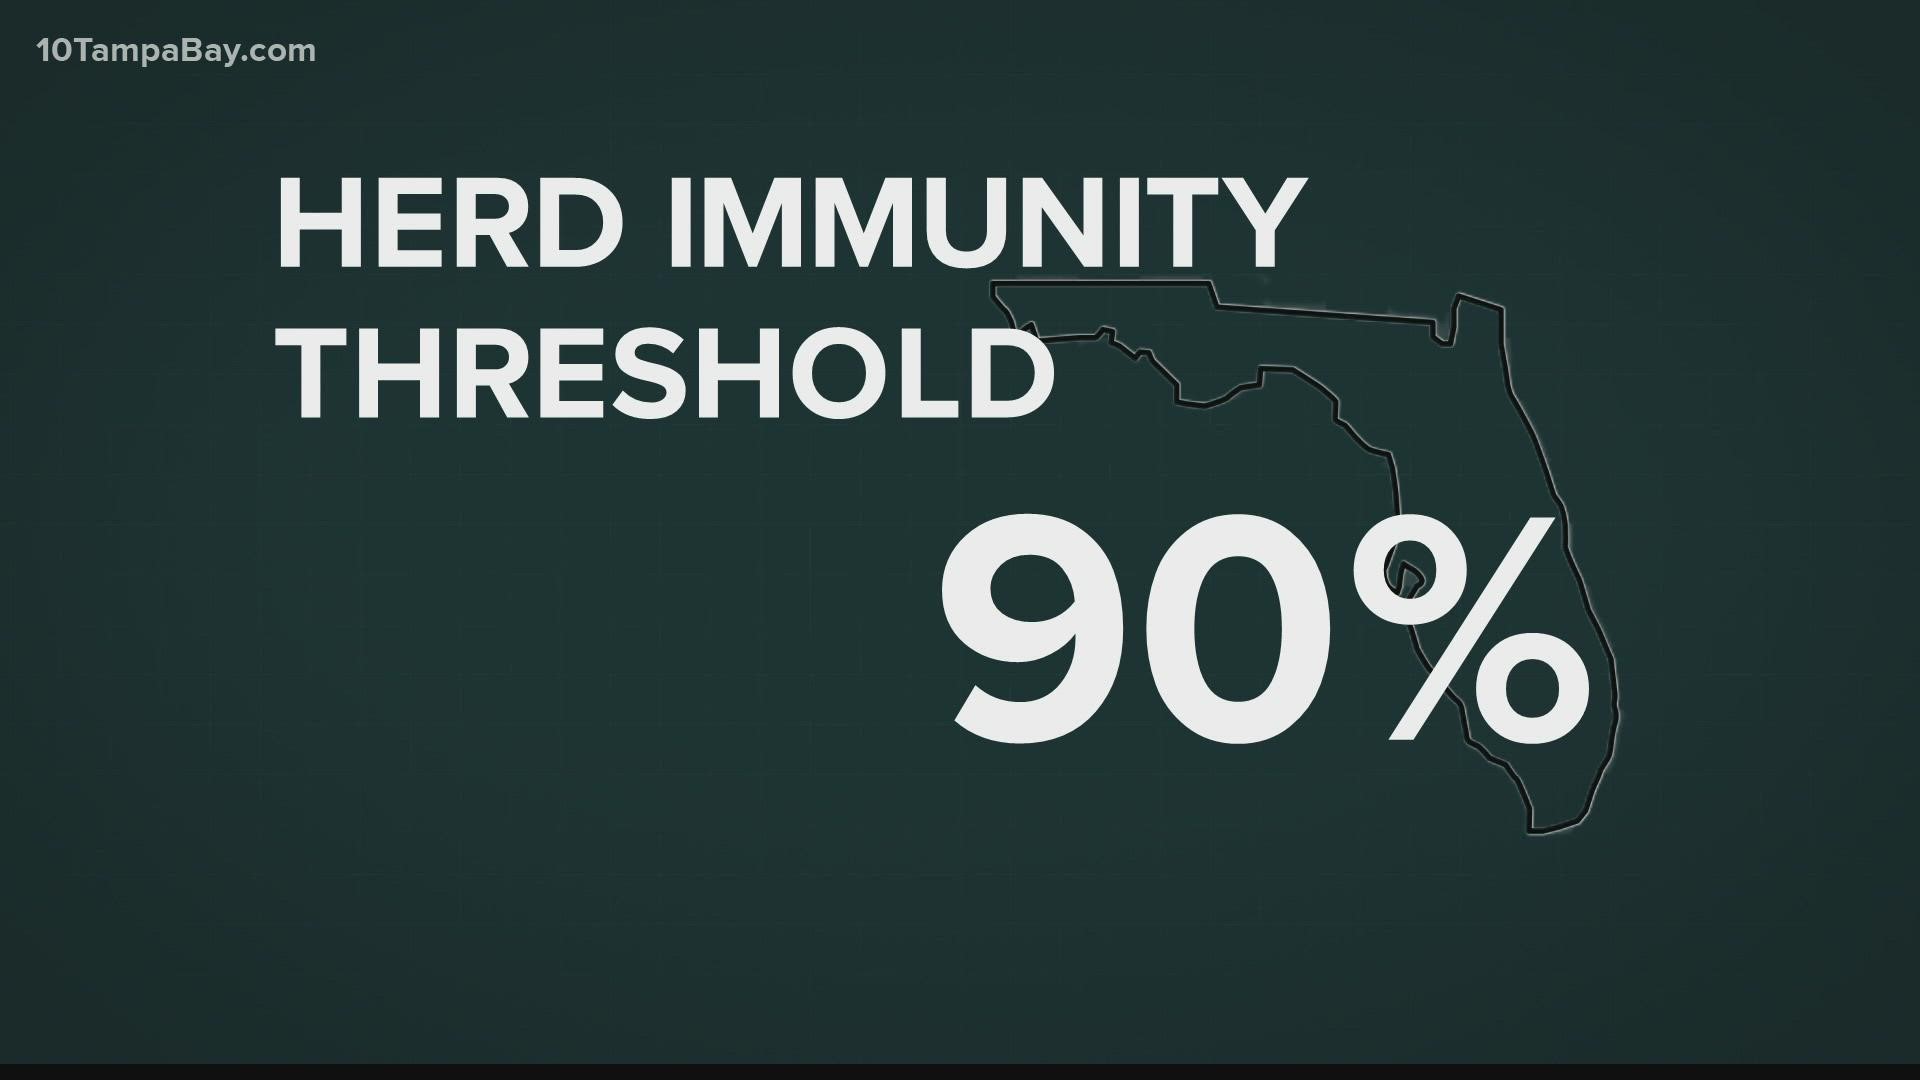 Experts' estimates to reach herd immunity have increased by, at least, 10 to 20 percent.